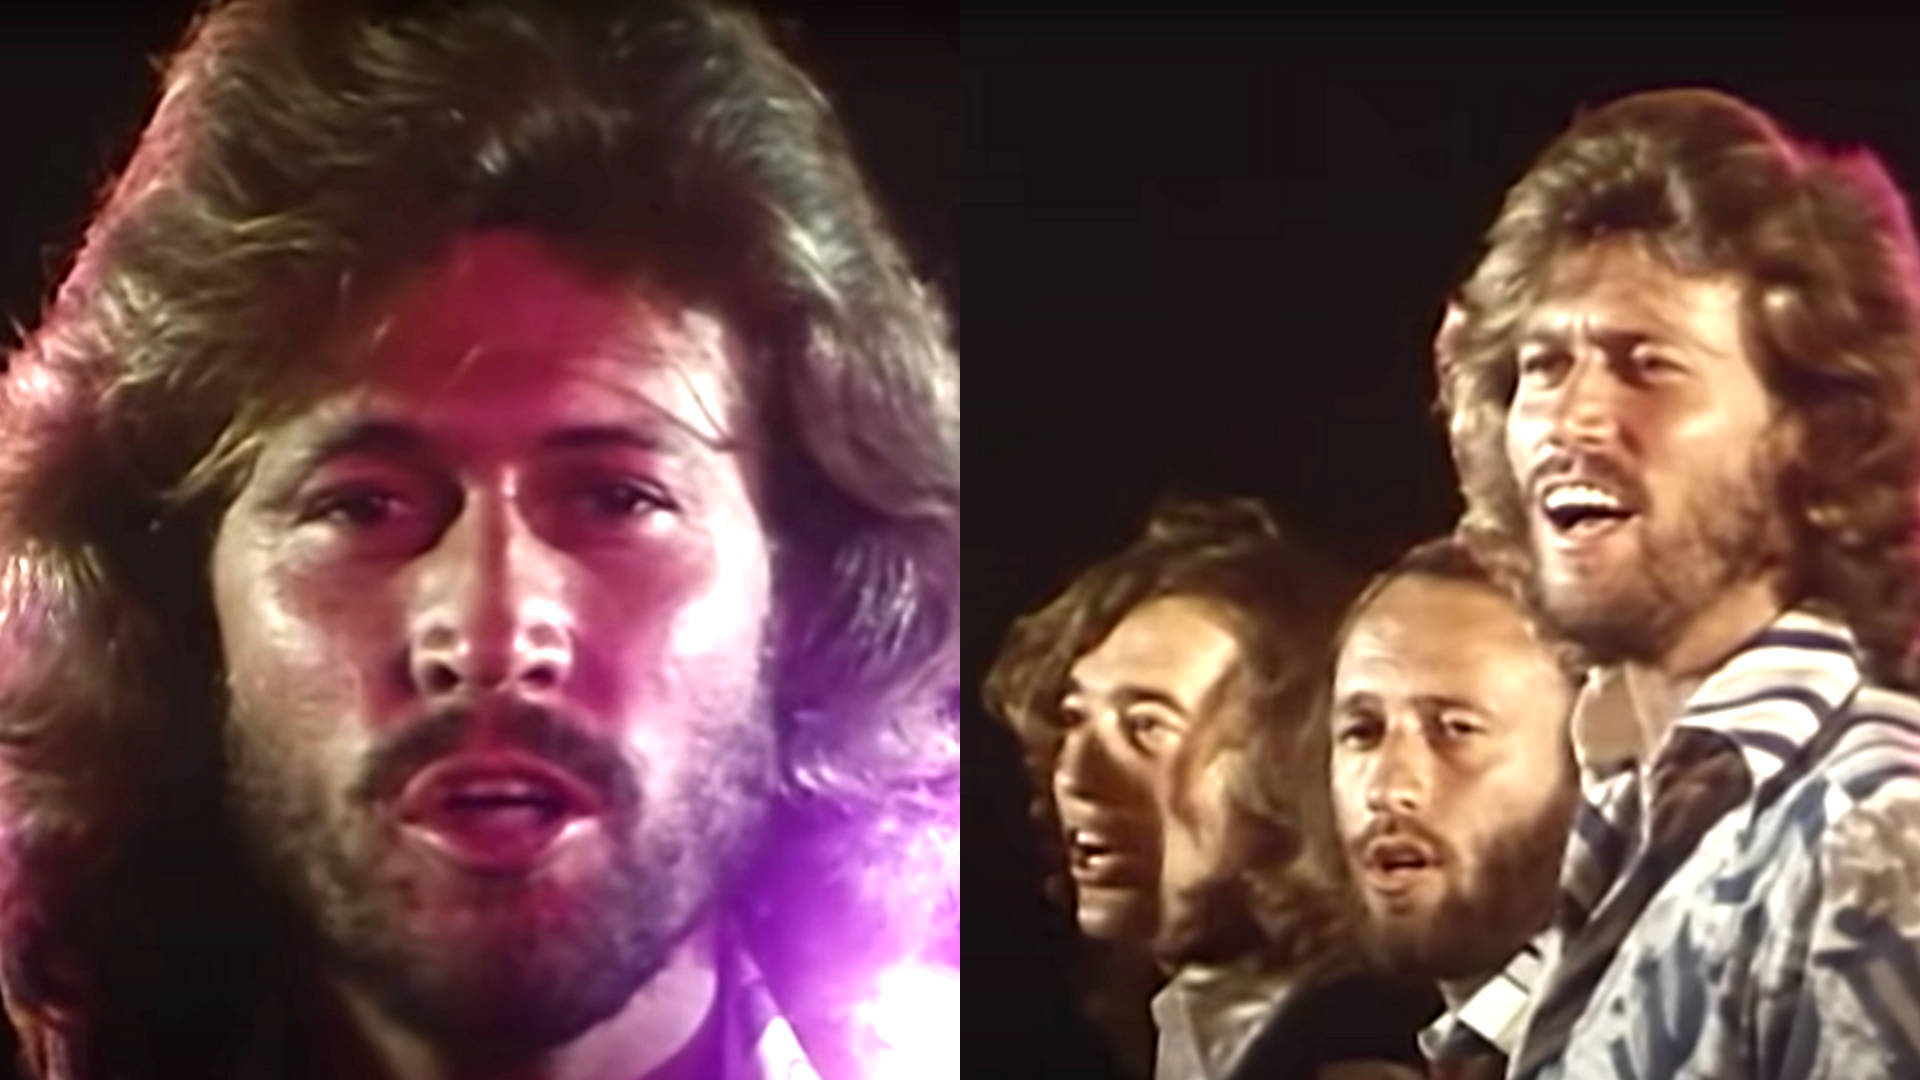 Bee Gees Barry Gibb Photo Combination Background